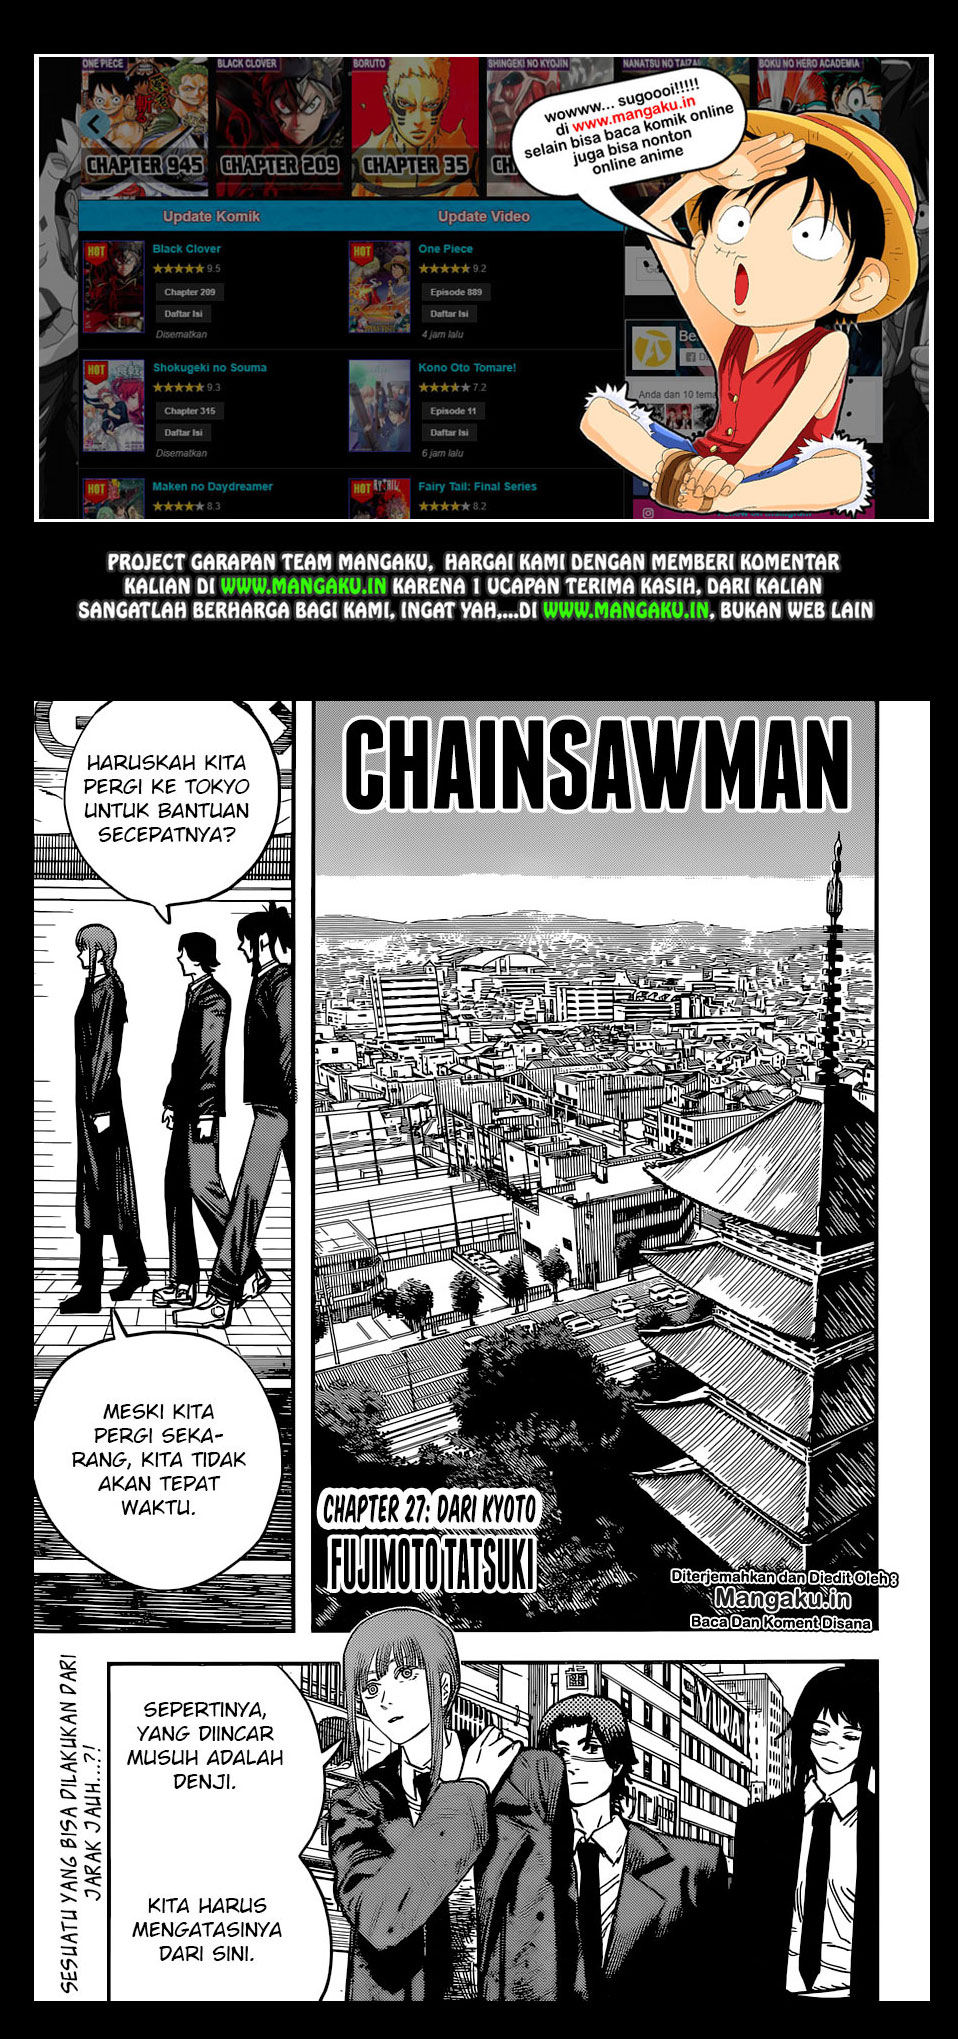 Chainsaw Man Chapter 27 2